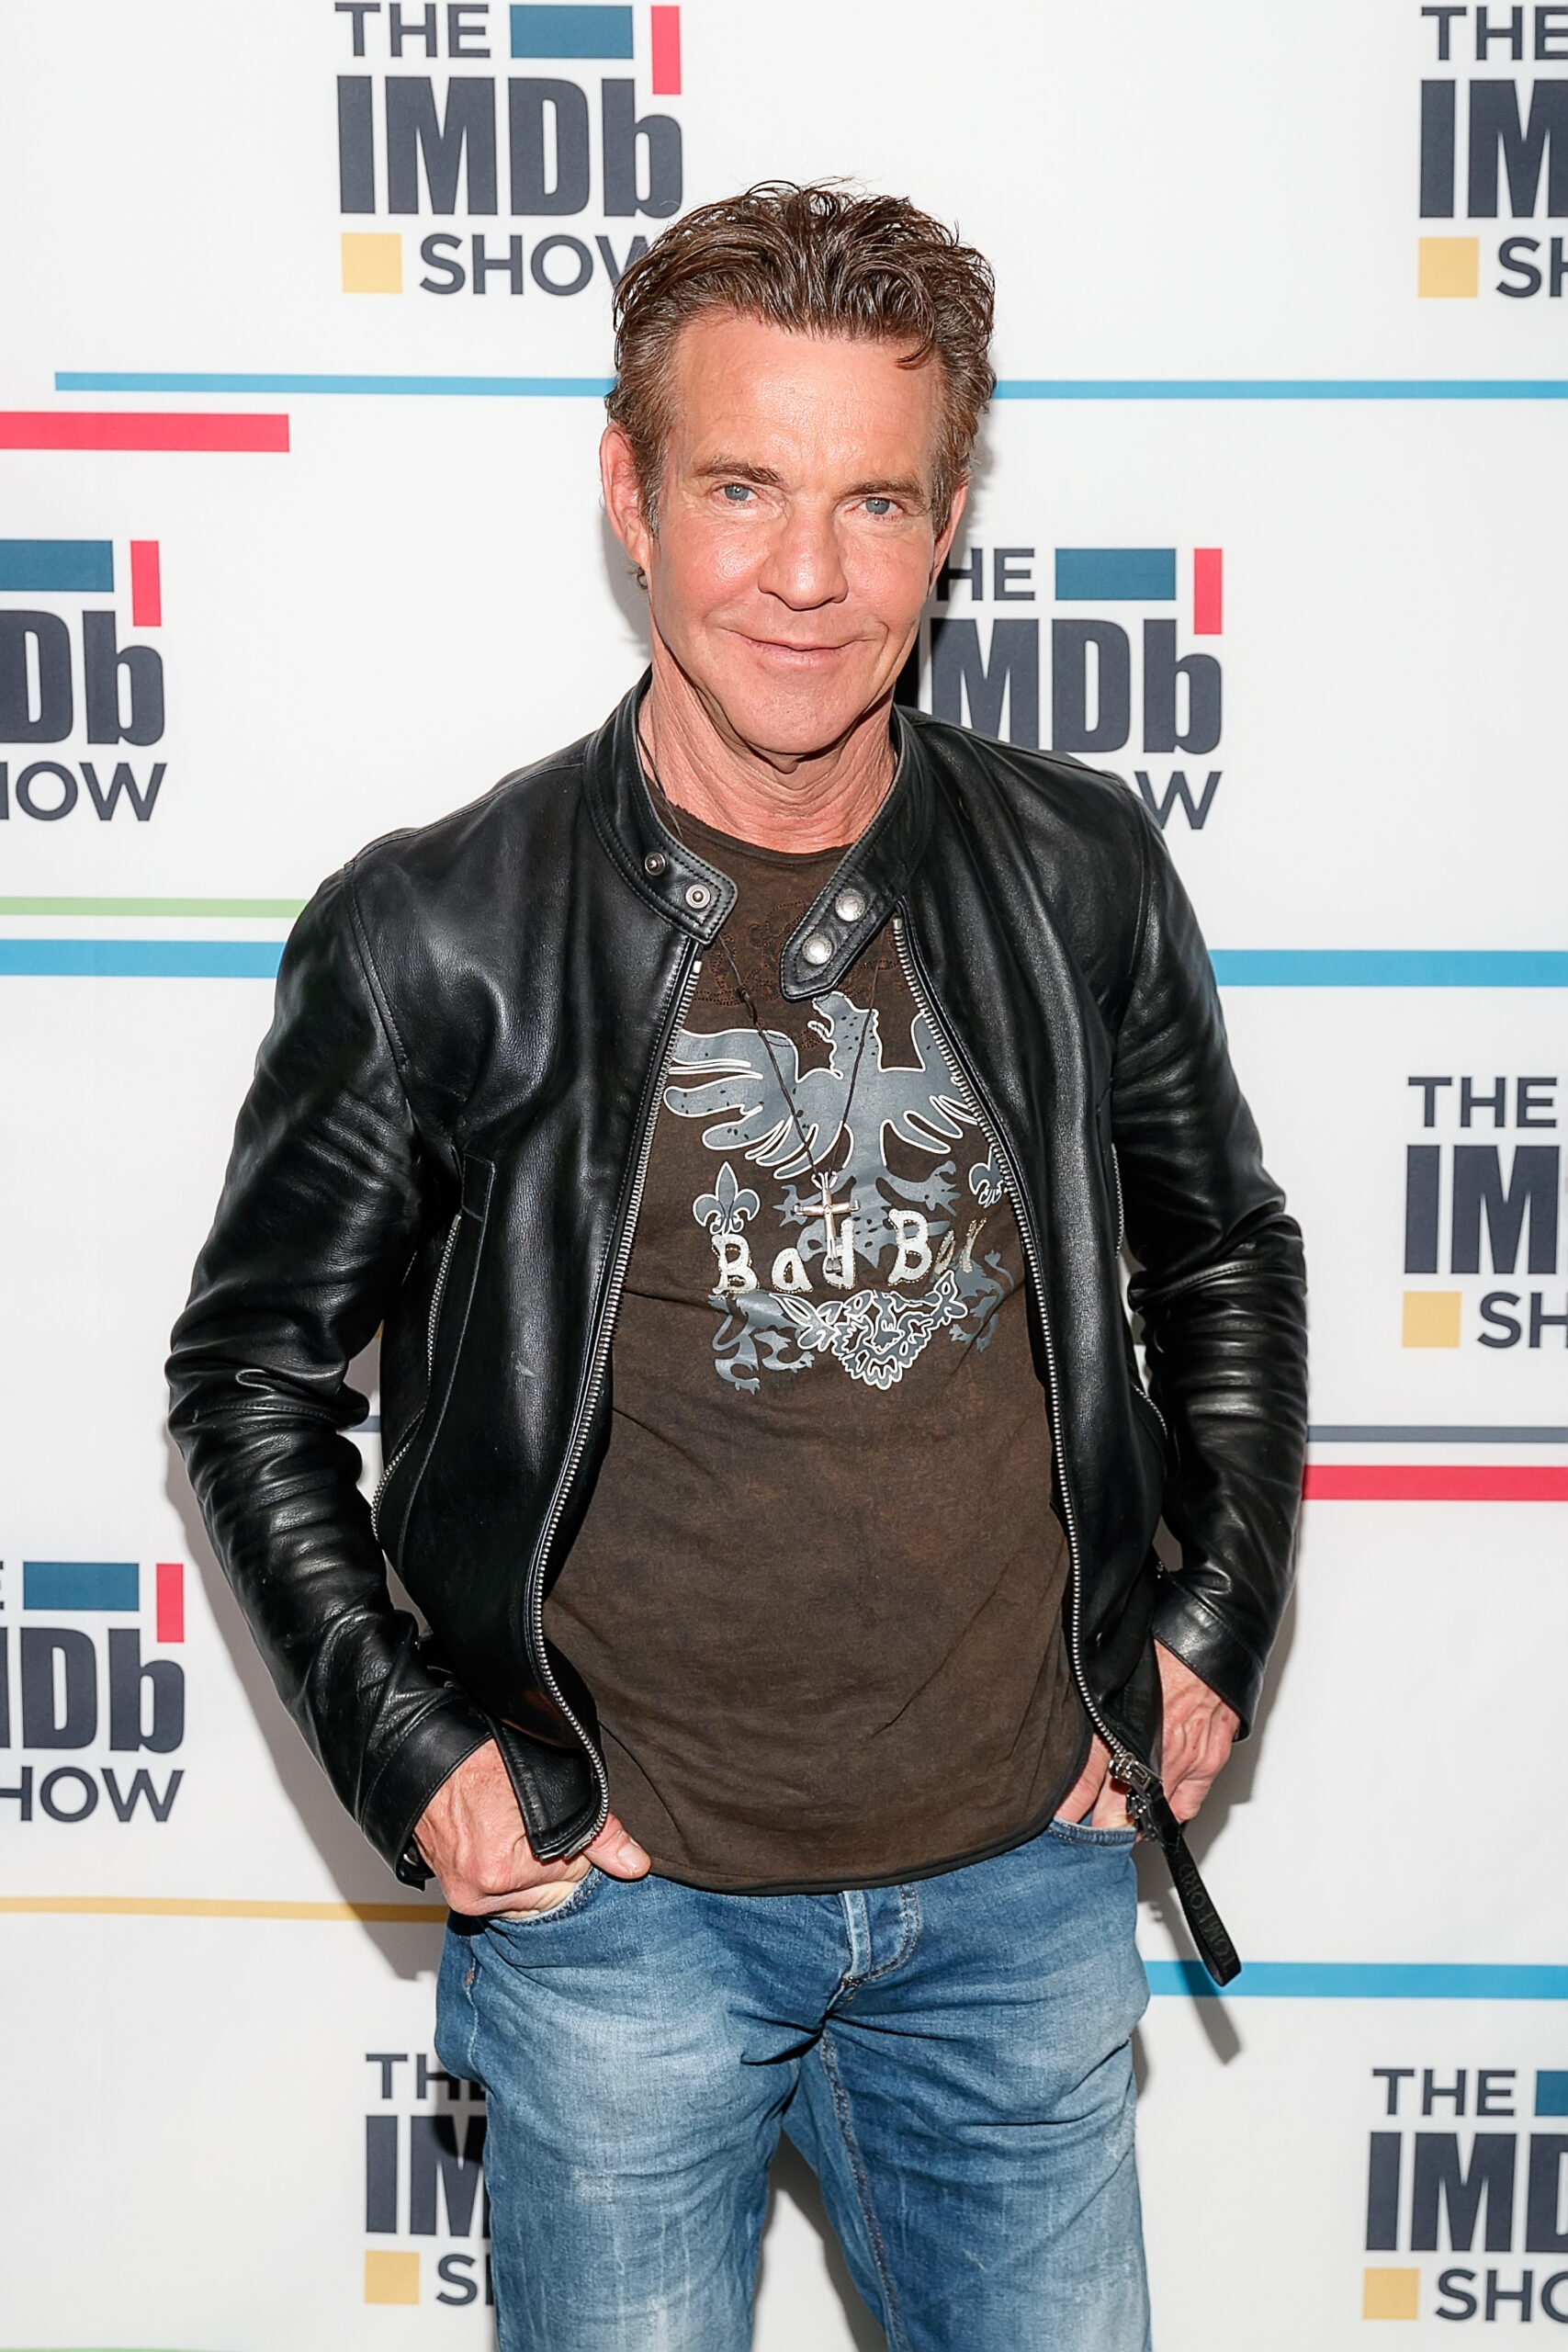 Actor Dennis Quaid on April 17, 2019, in Studio City, California | Source: Getty Images